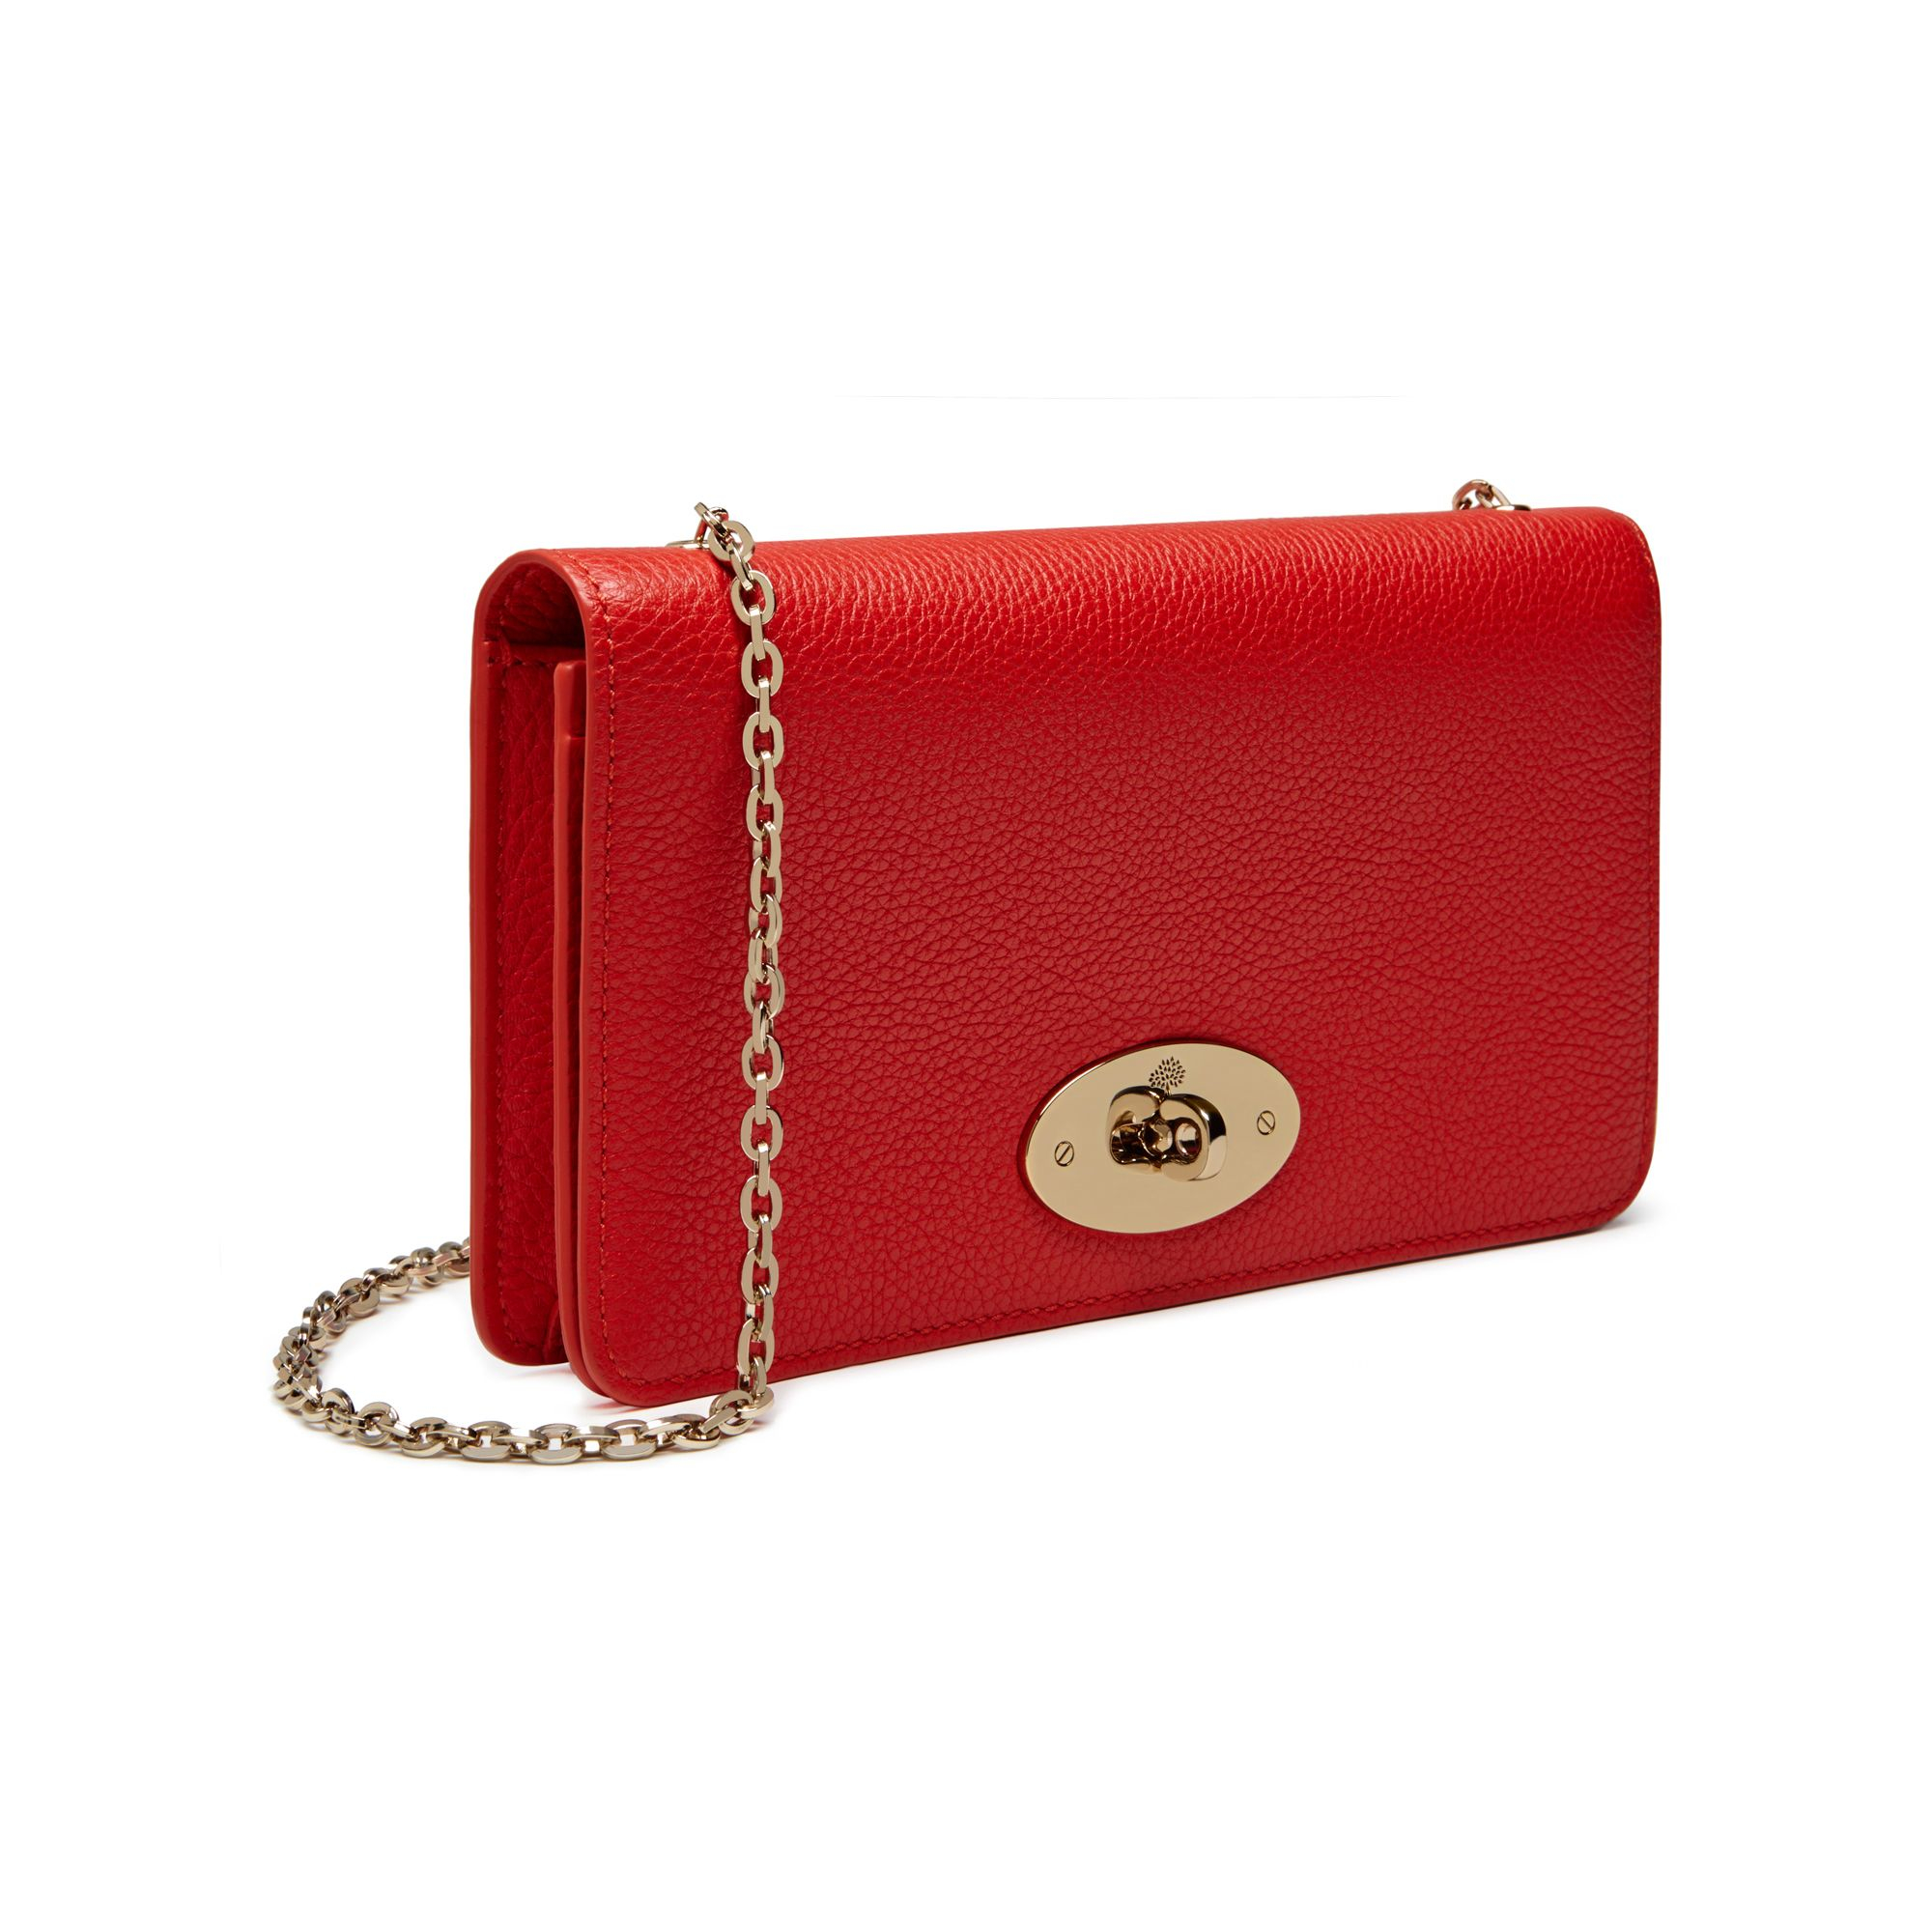 Lyst - Mulberry Bayswater Clutch Wallet in Red